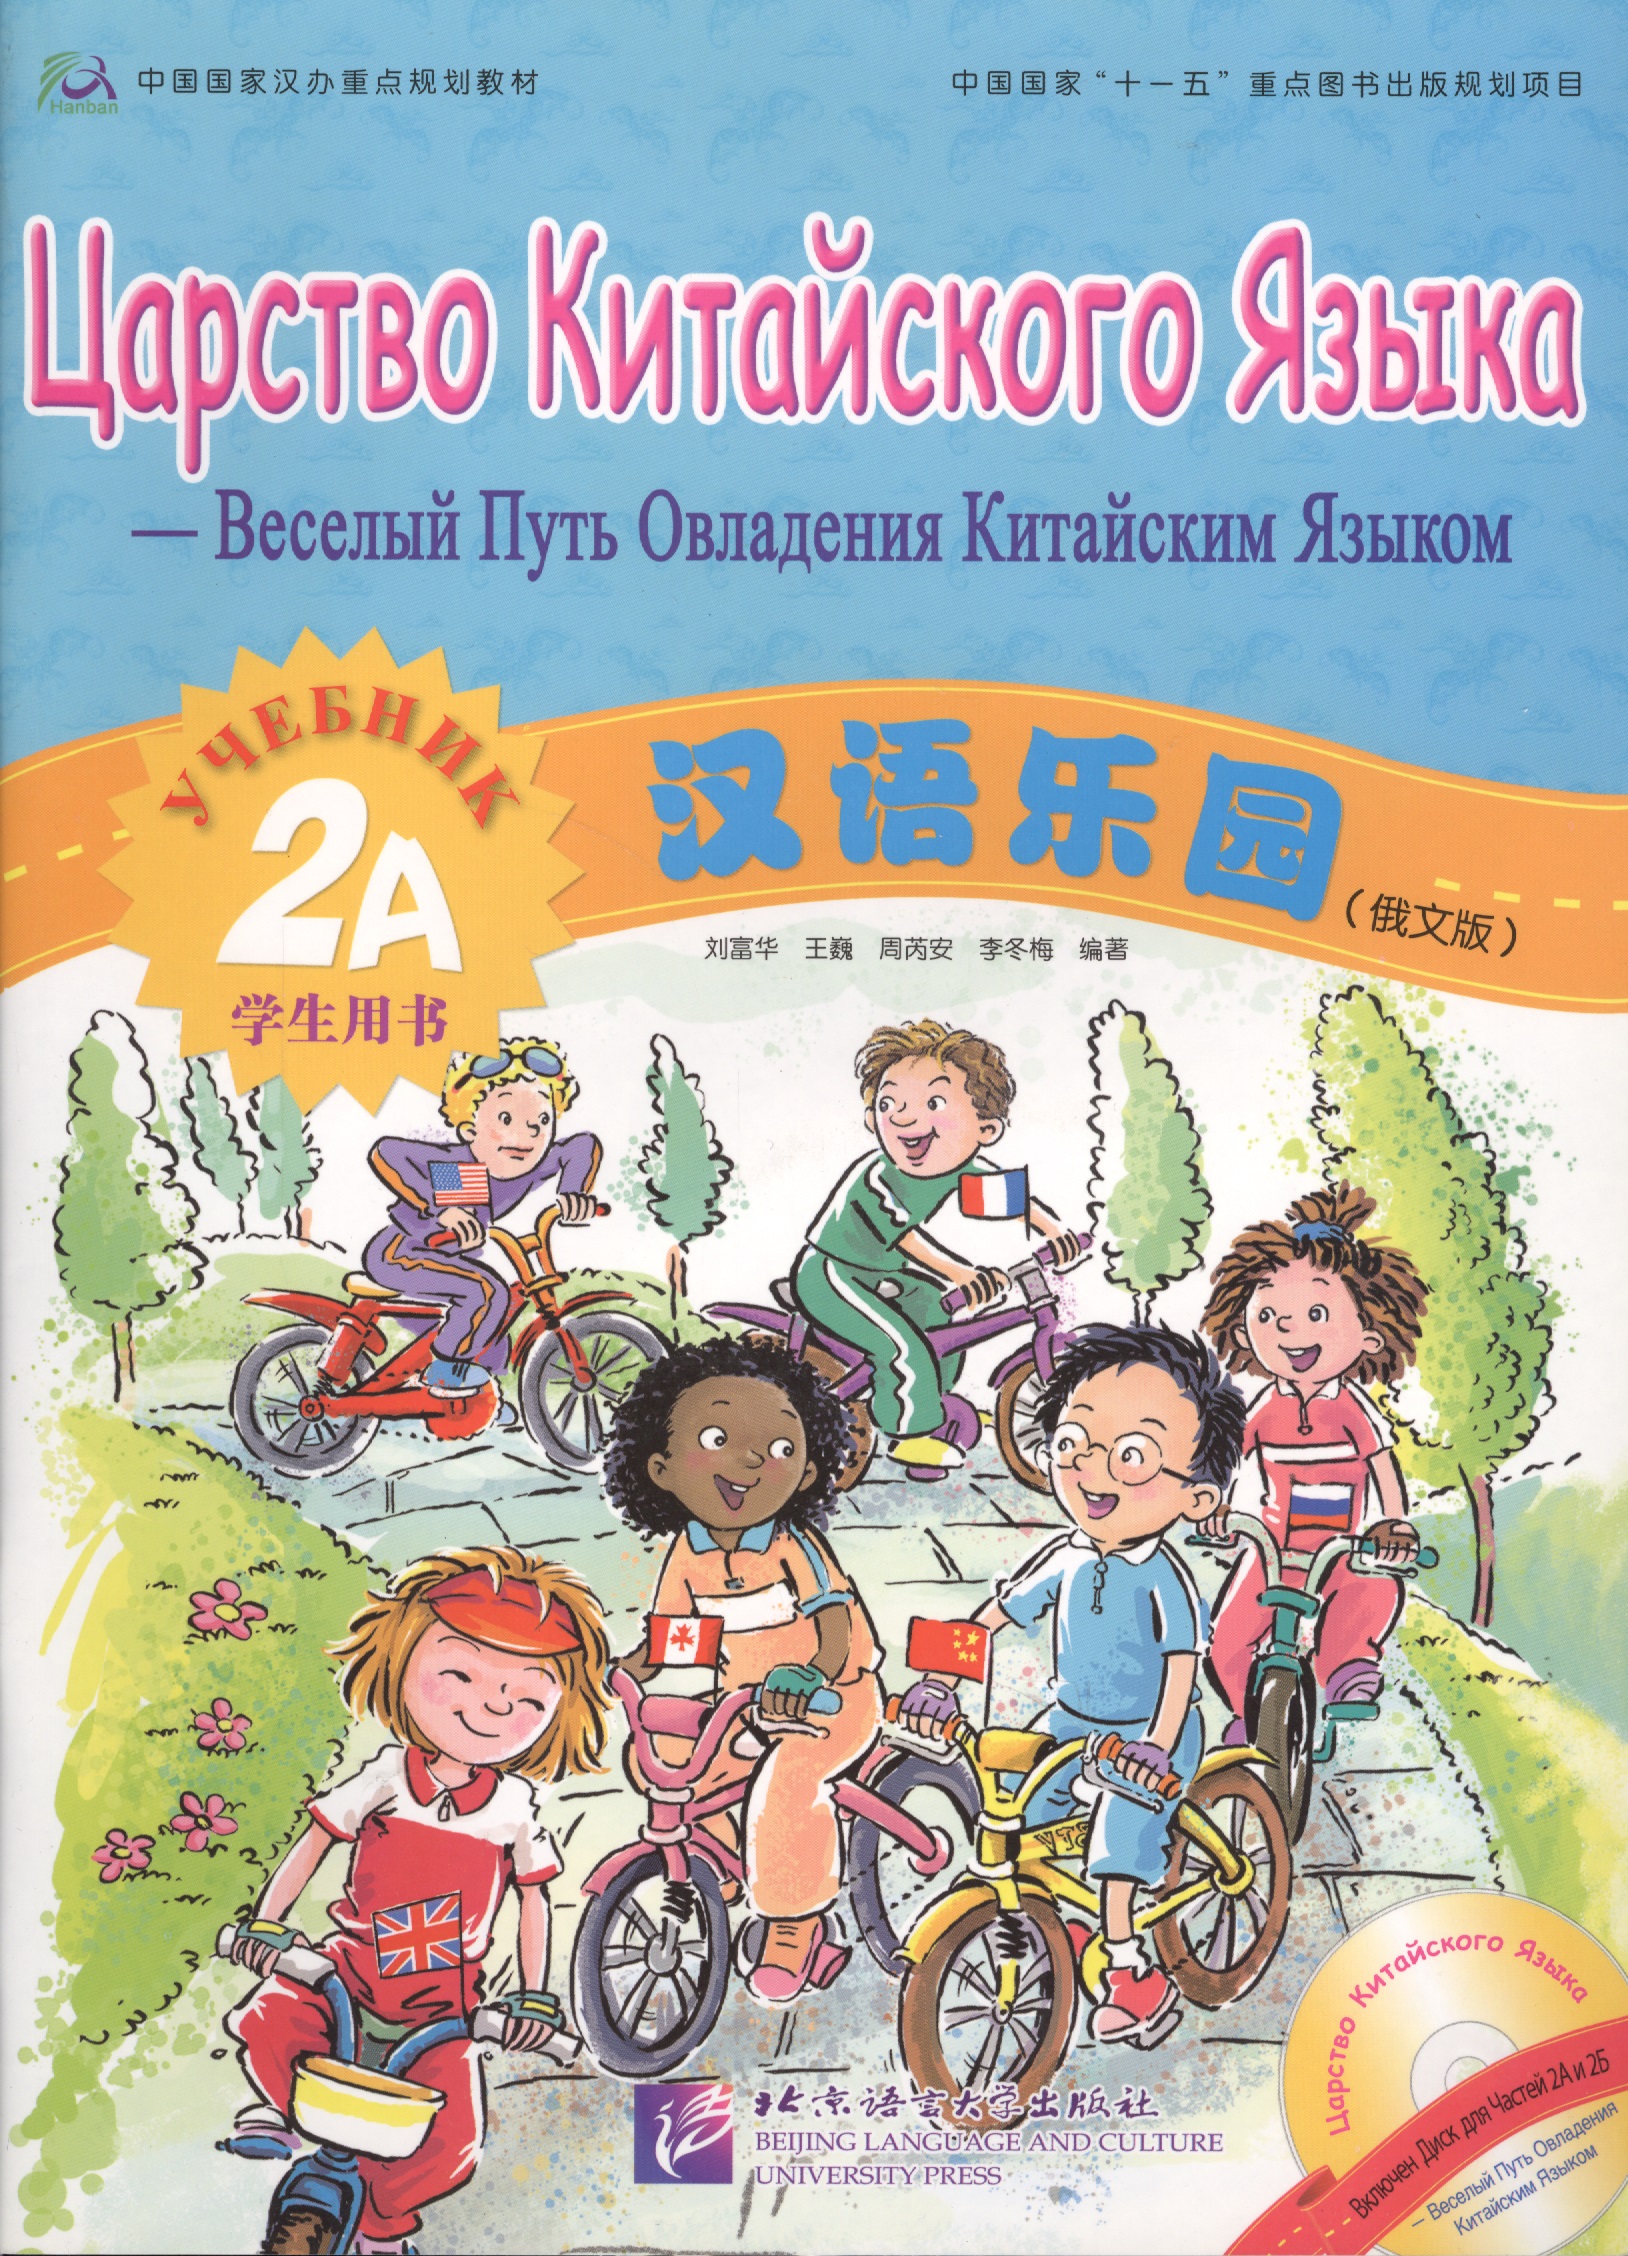 Fuhua L. Chinese Paradise (Russian edition) 2A / Царство китайского языка (русское издание) 2A - Students book with CD fuhua l chinese paradise 2 царство китайского языка 2 teachers book